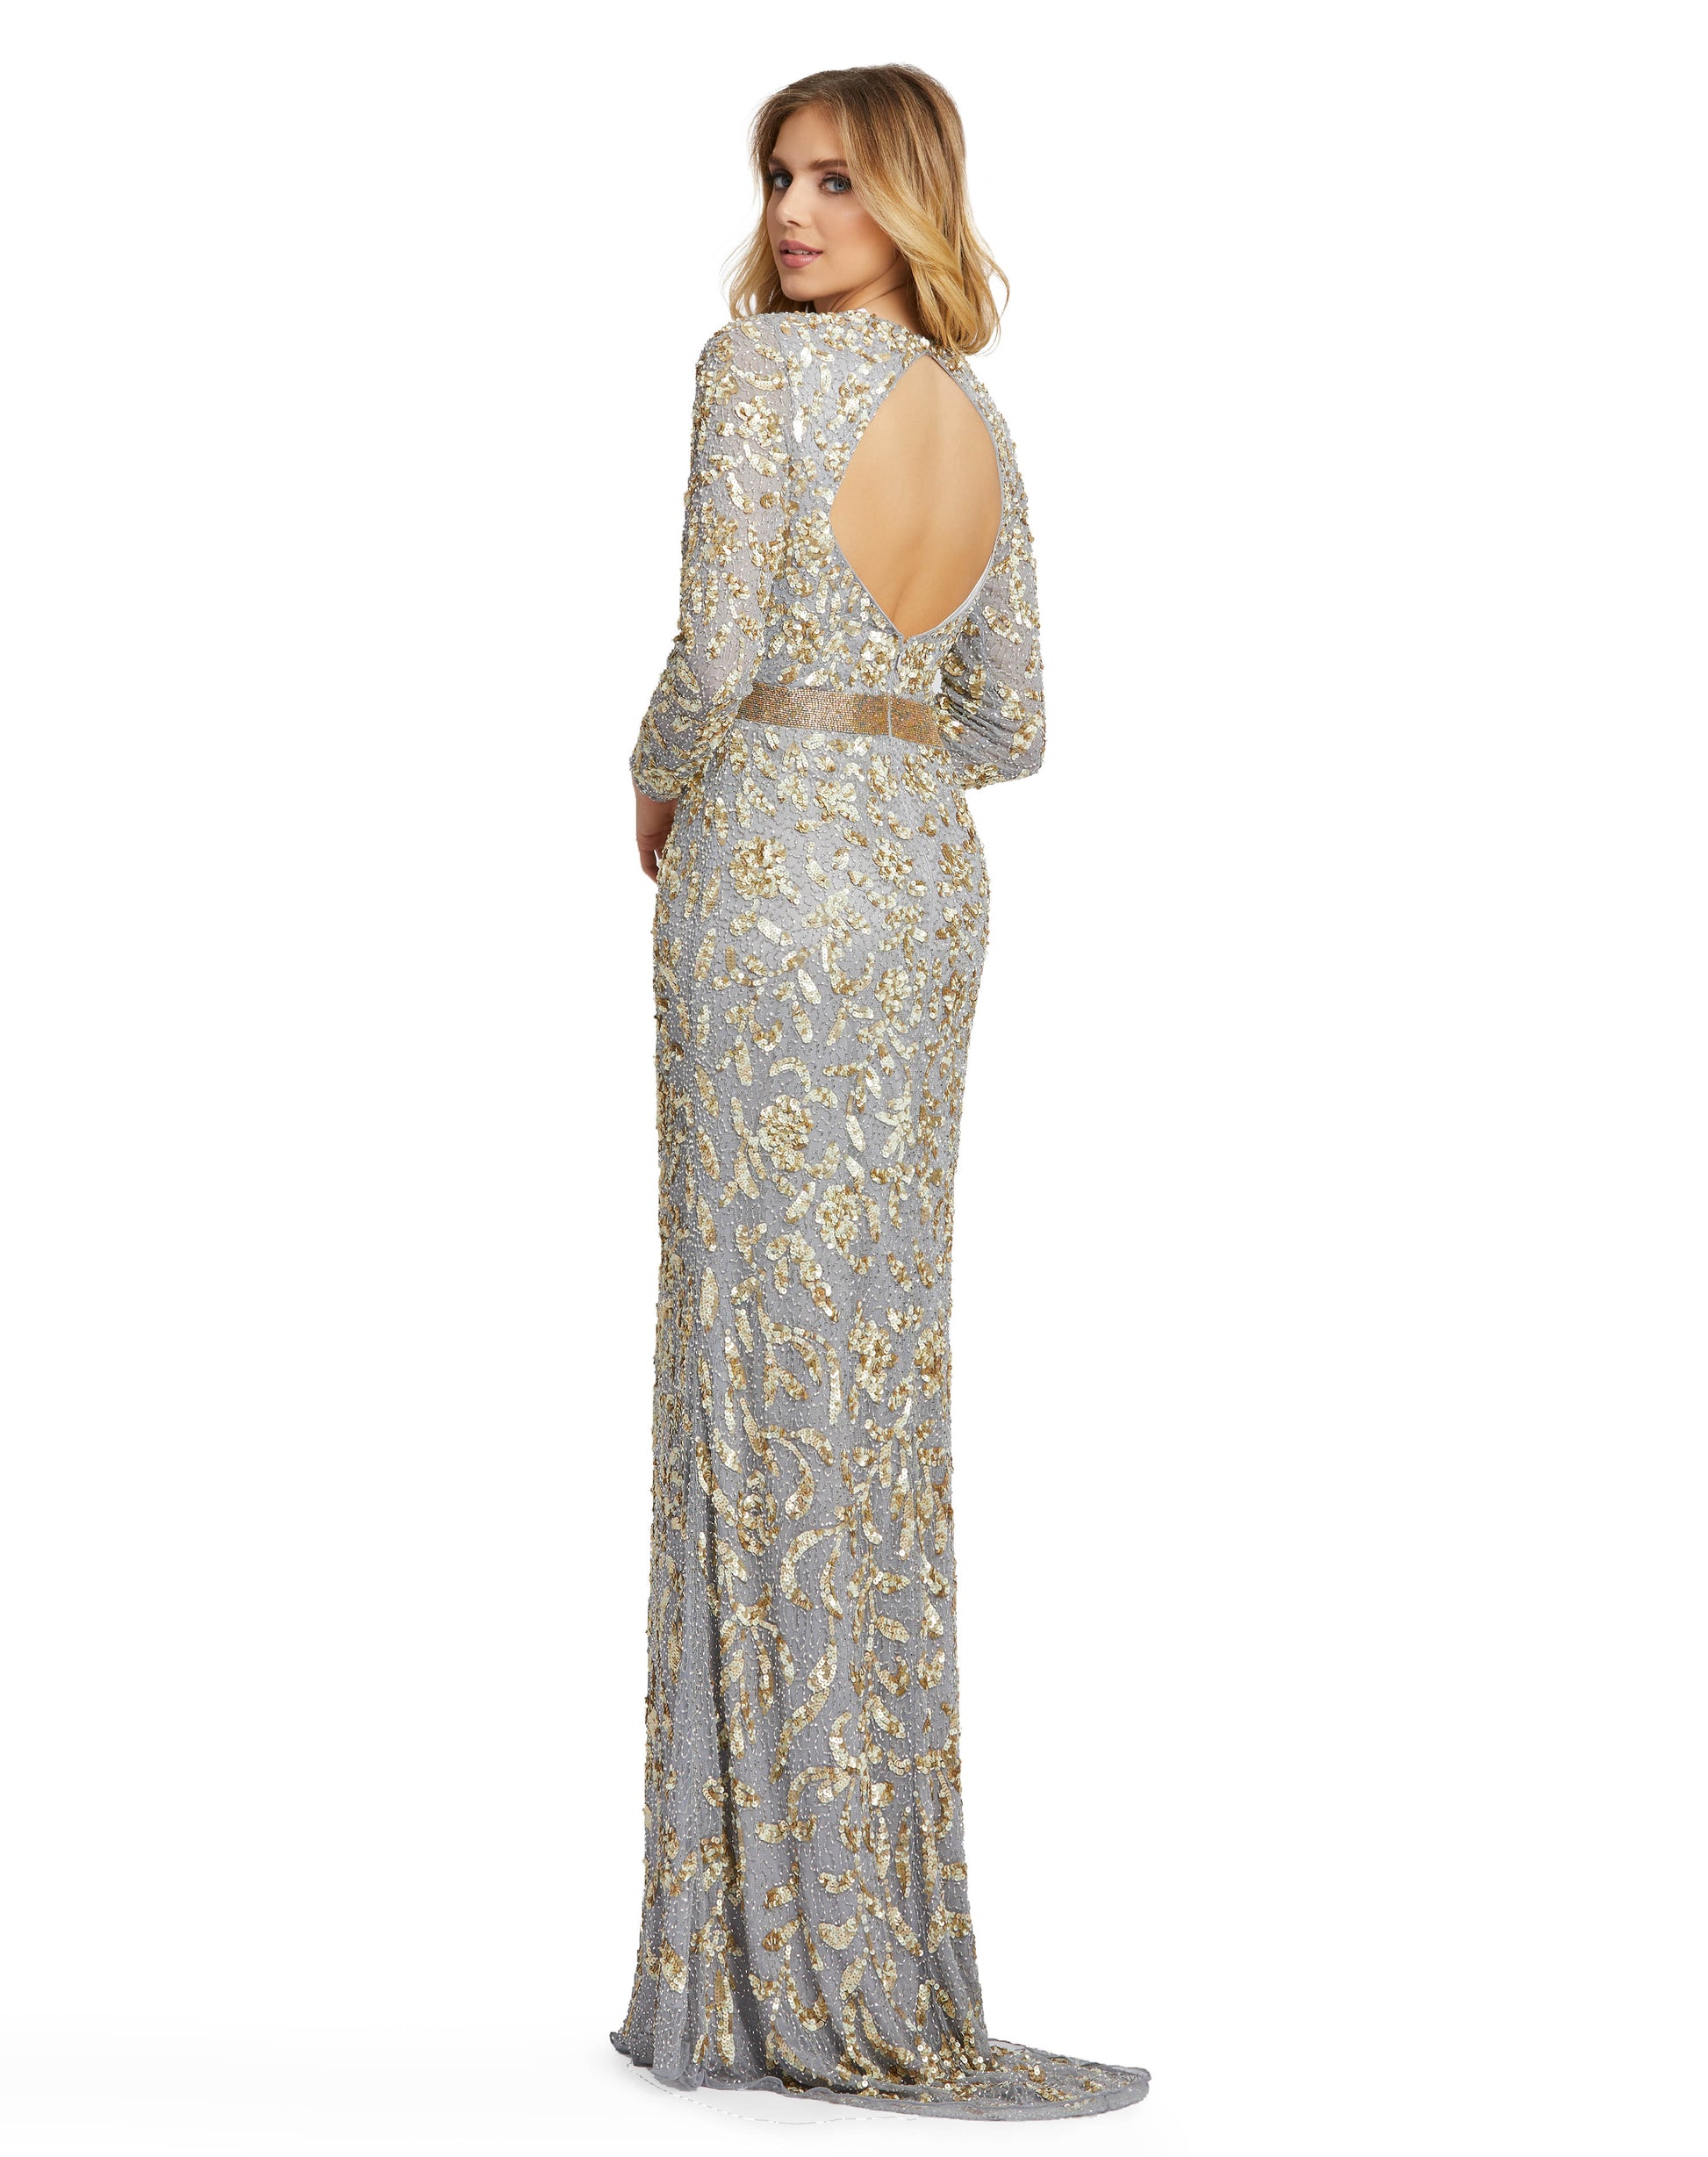 This beaded beauty is a dream-come-true dress. Mac Duggal translates your fantasies on a spellbinding gown made with thousands of seed beads and metallic sequins. The gown is cut in a column silhouette with fitted long sleeves, a decorative illusion bodic